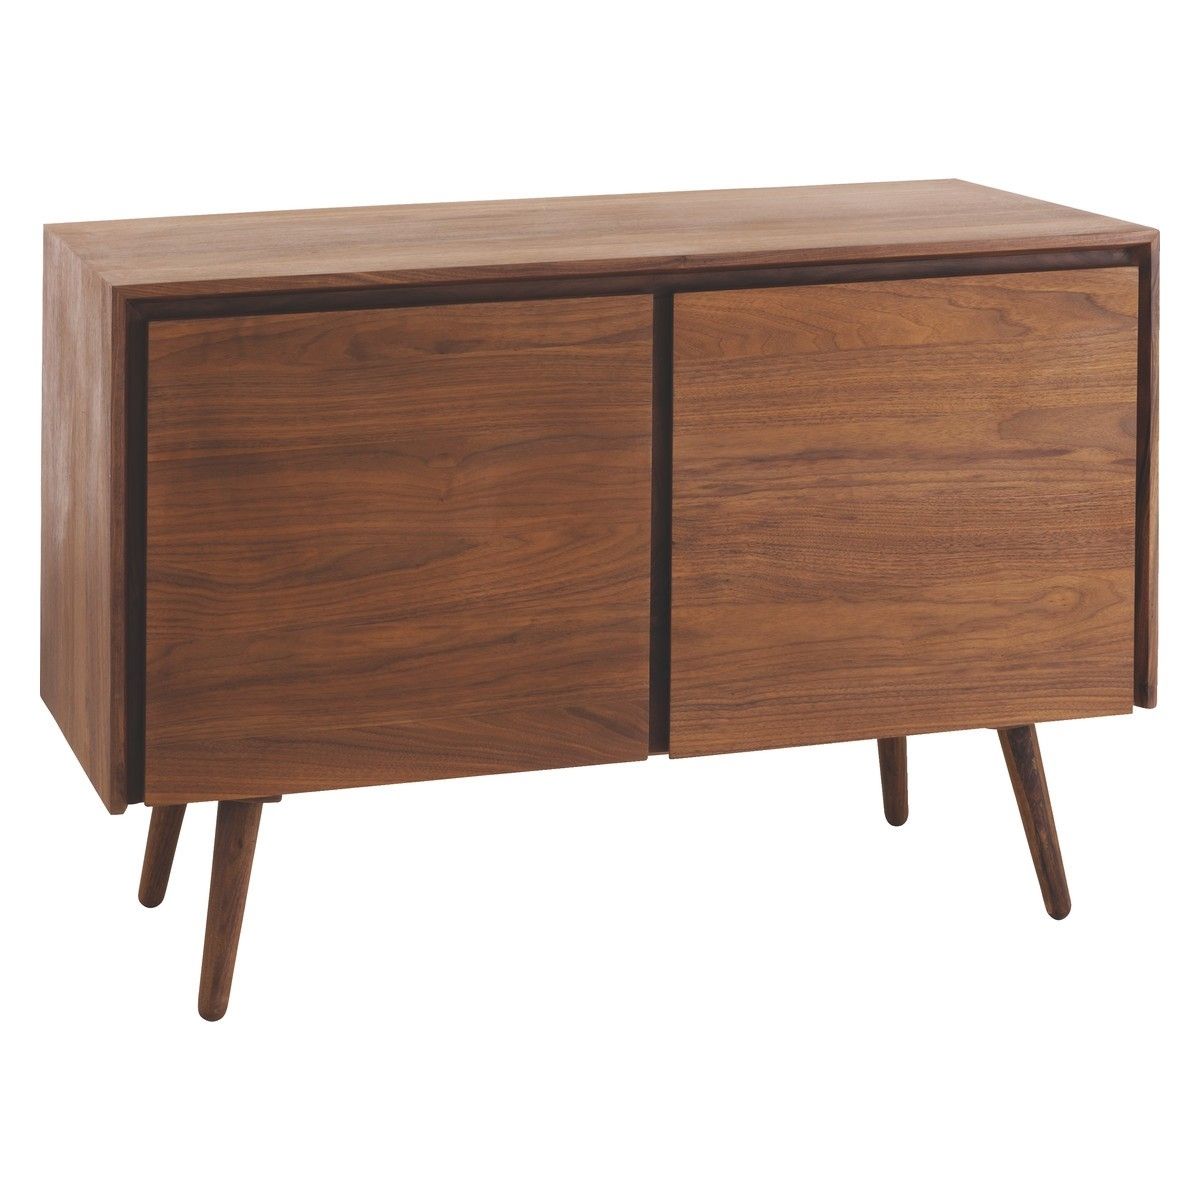 Vince Walnut 2 Door Mid Century Sideboard | Buy Now At Habitat Uk Intended For Most Recently Released Oil Pale Finish 3 Door Sideboards (Photo 11 of 20)